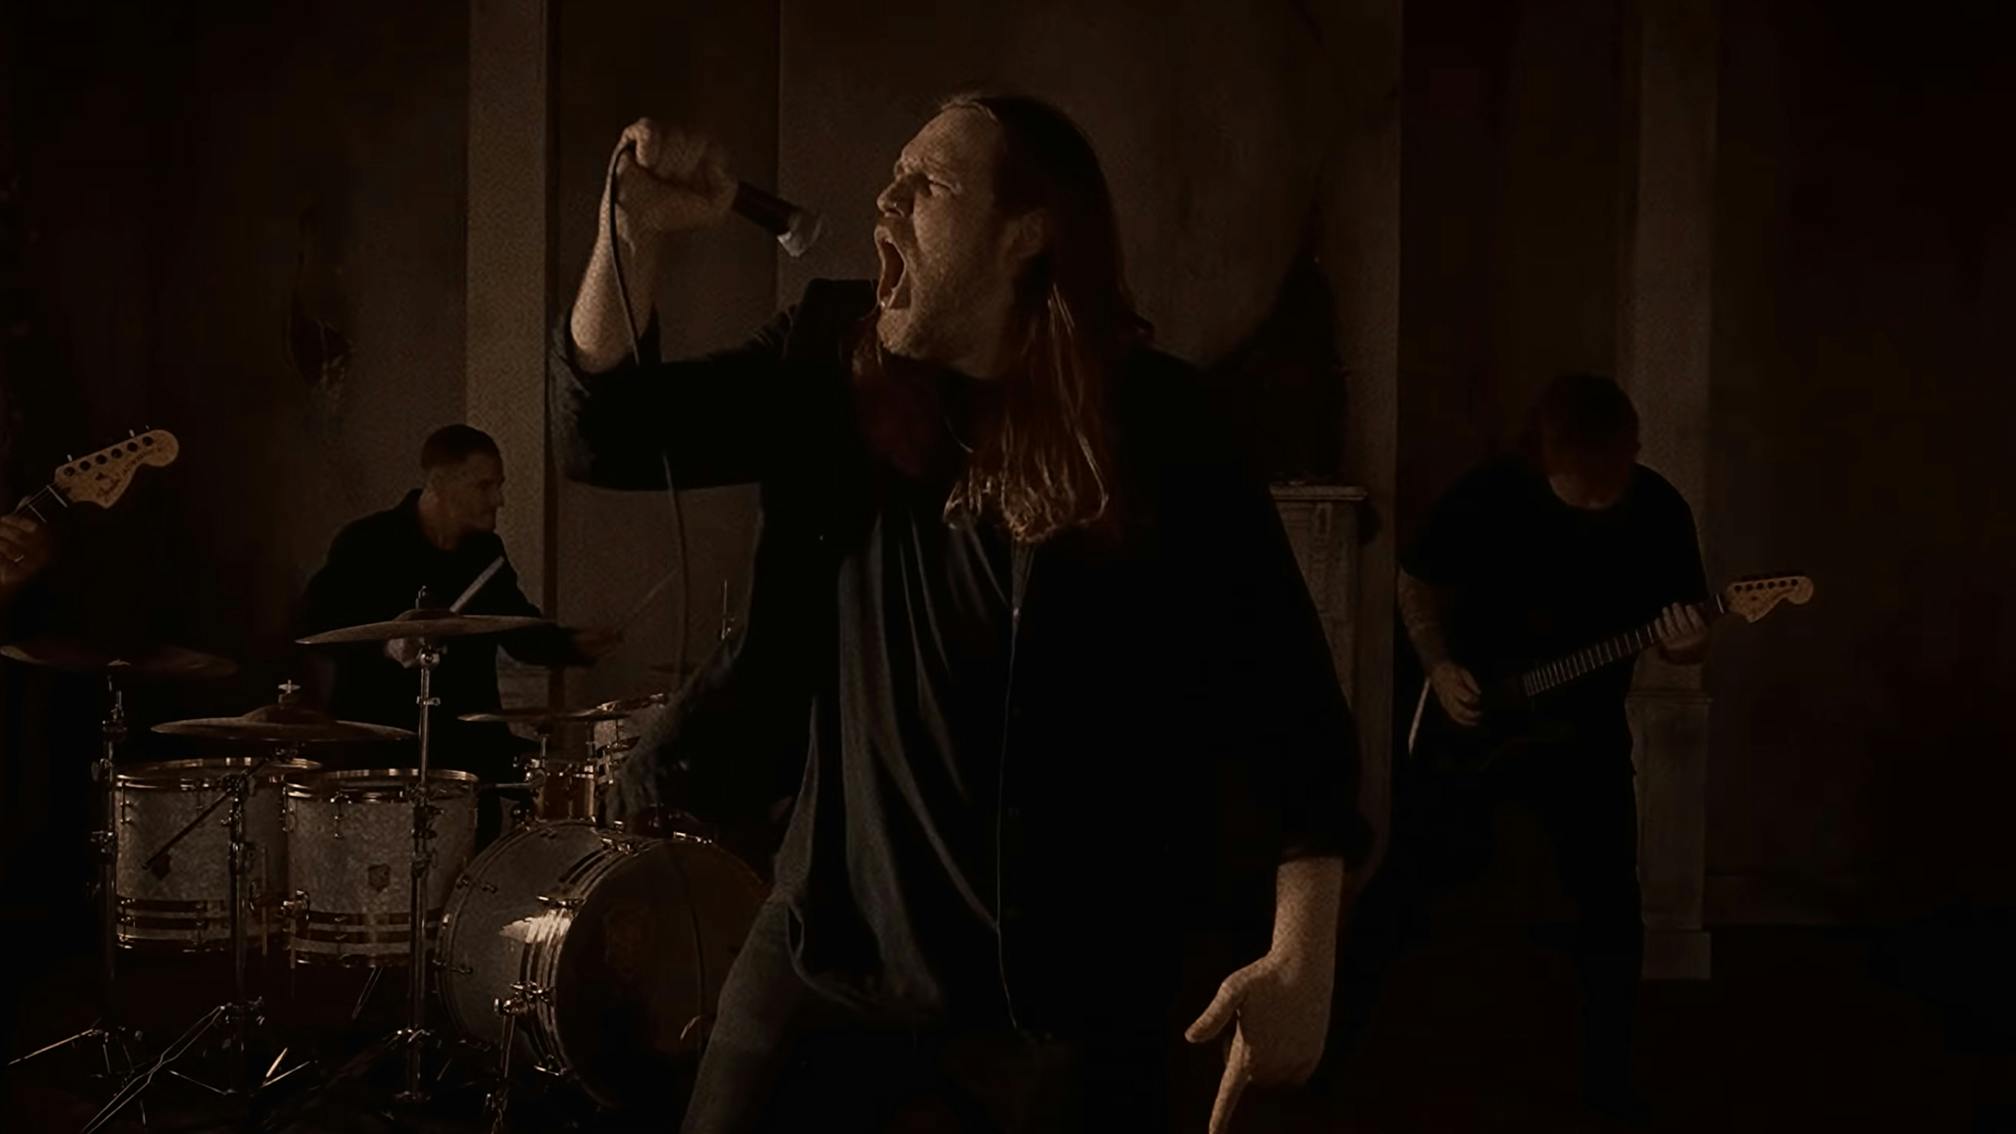 Wage War have unleashed a crushing new single, High Horse